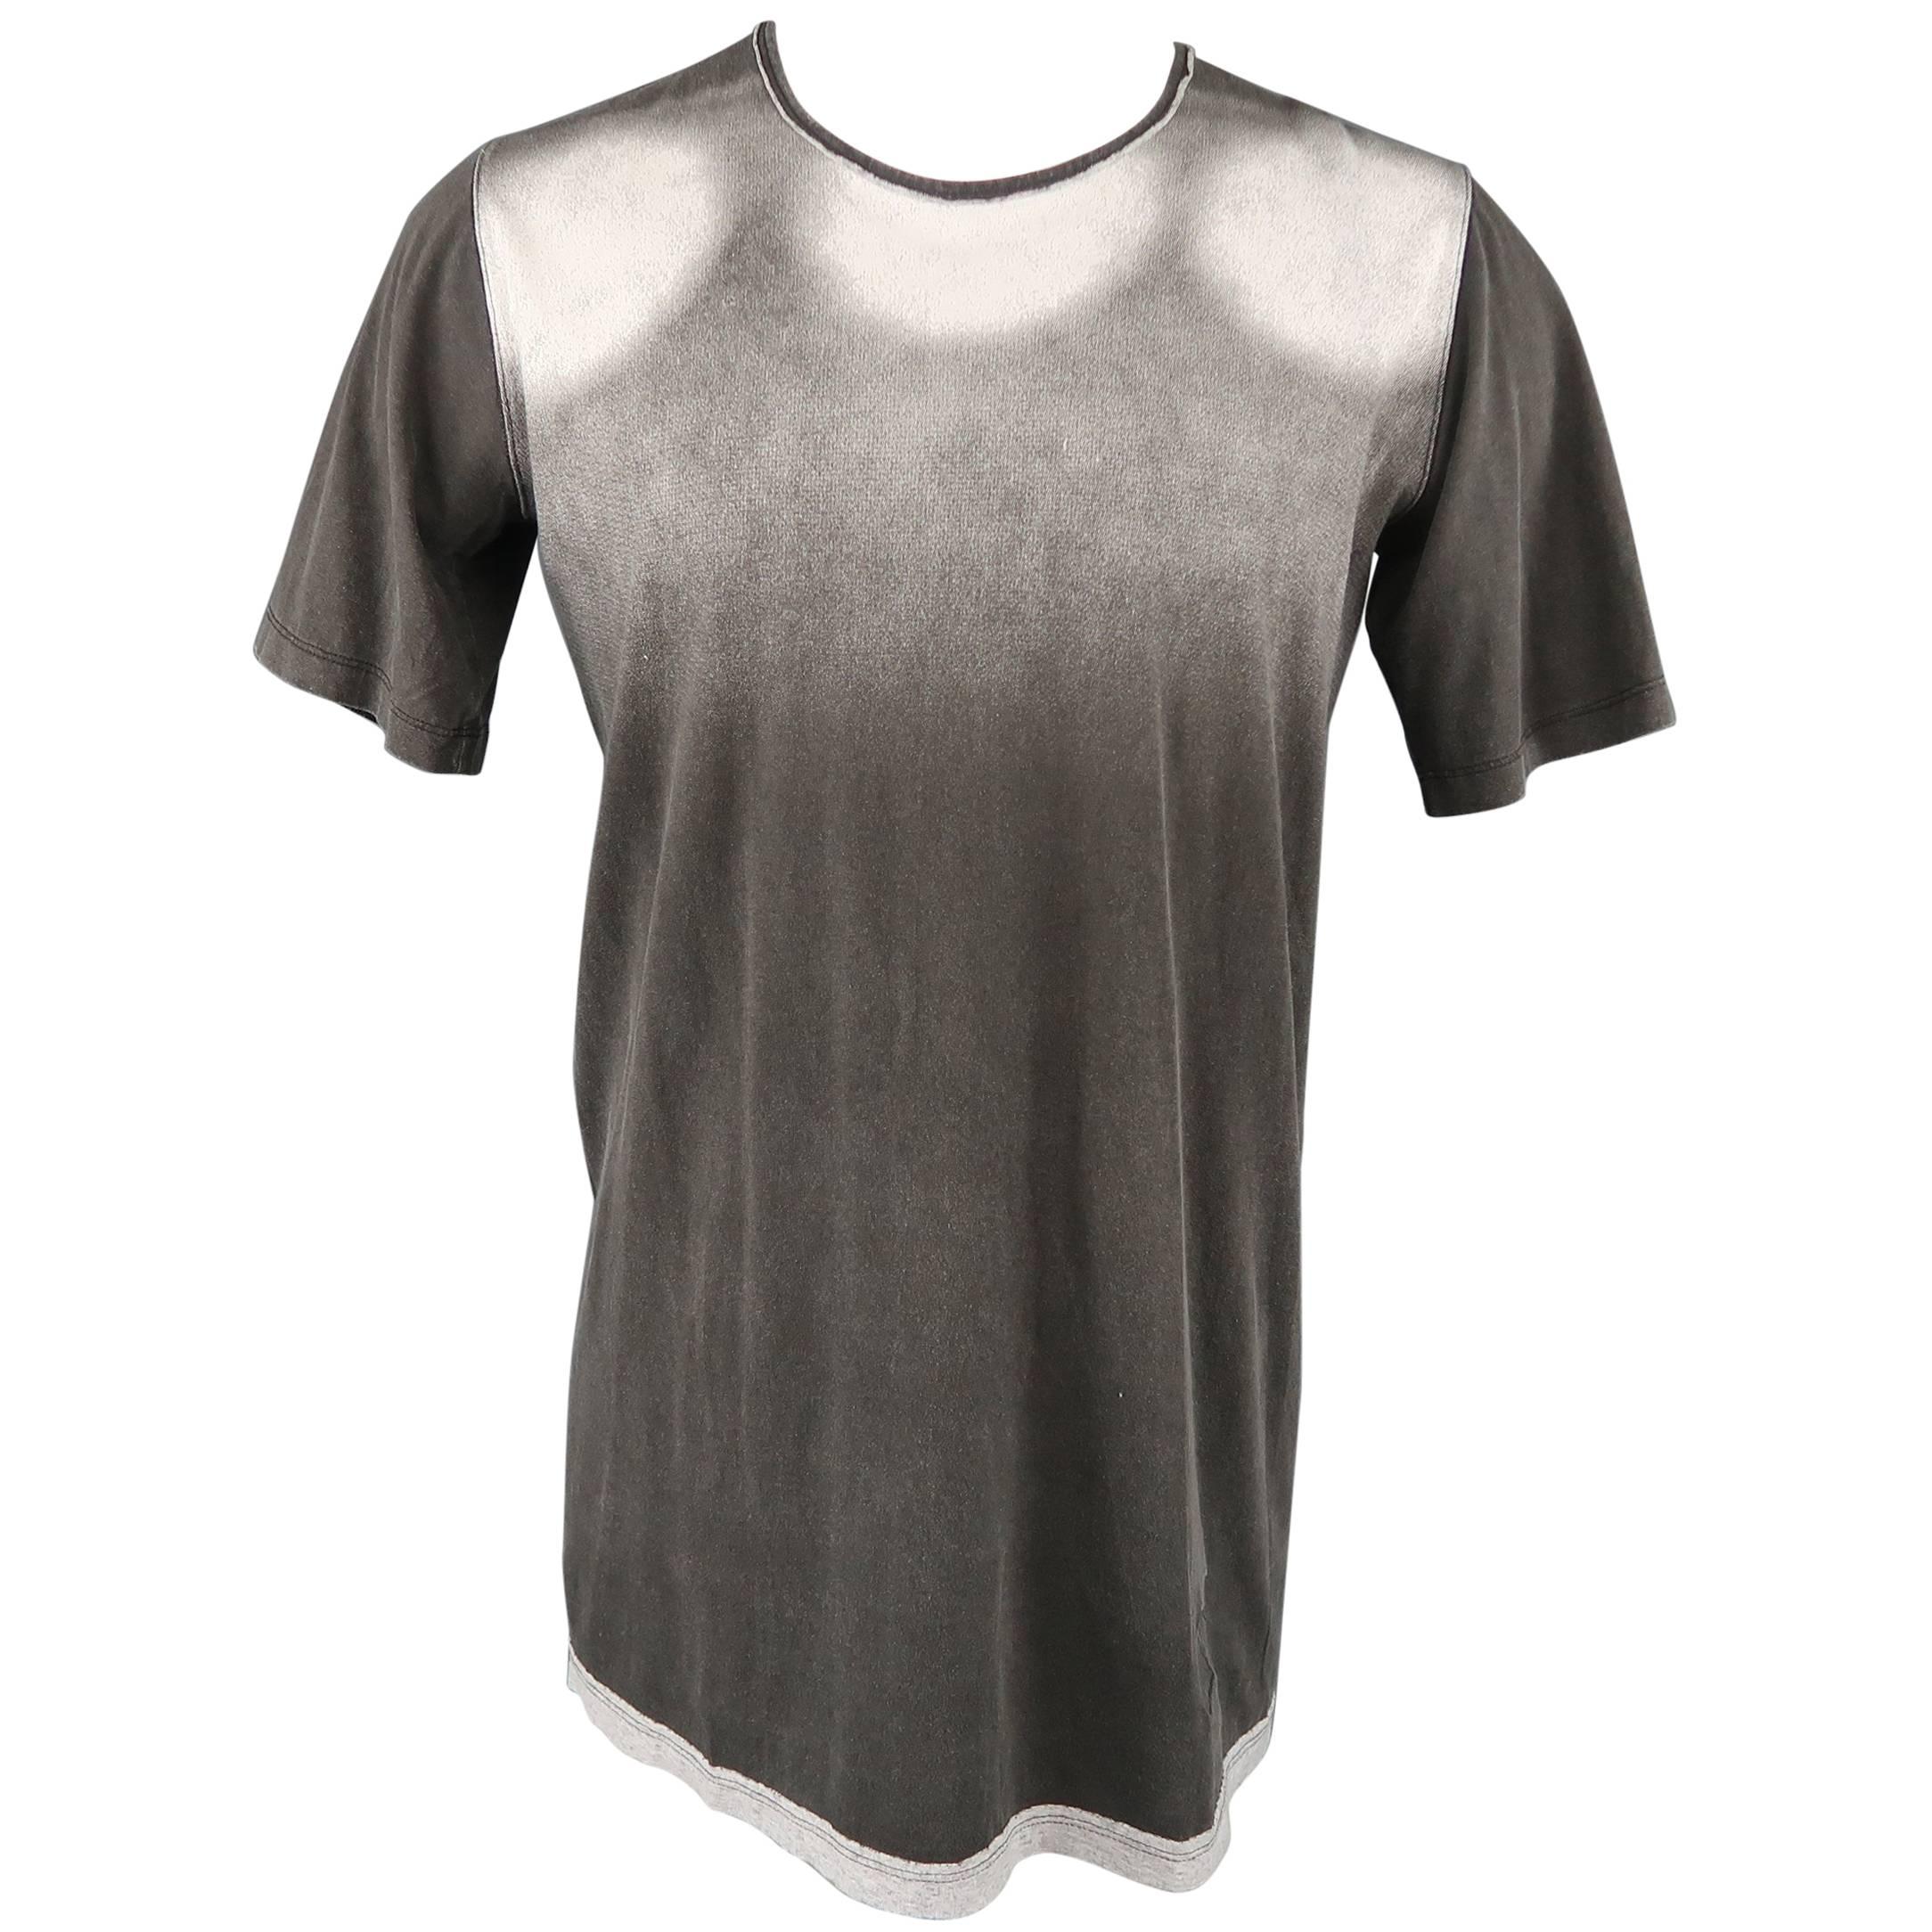 DRKSHDW by Rick Owens Men's Dark Gray Ombre Graphic Cotton T shirt